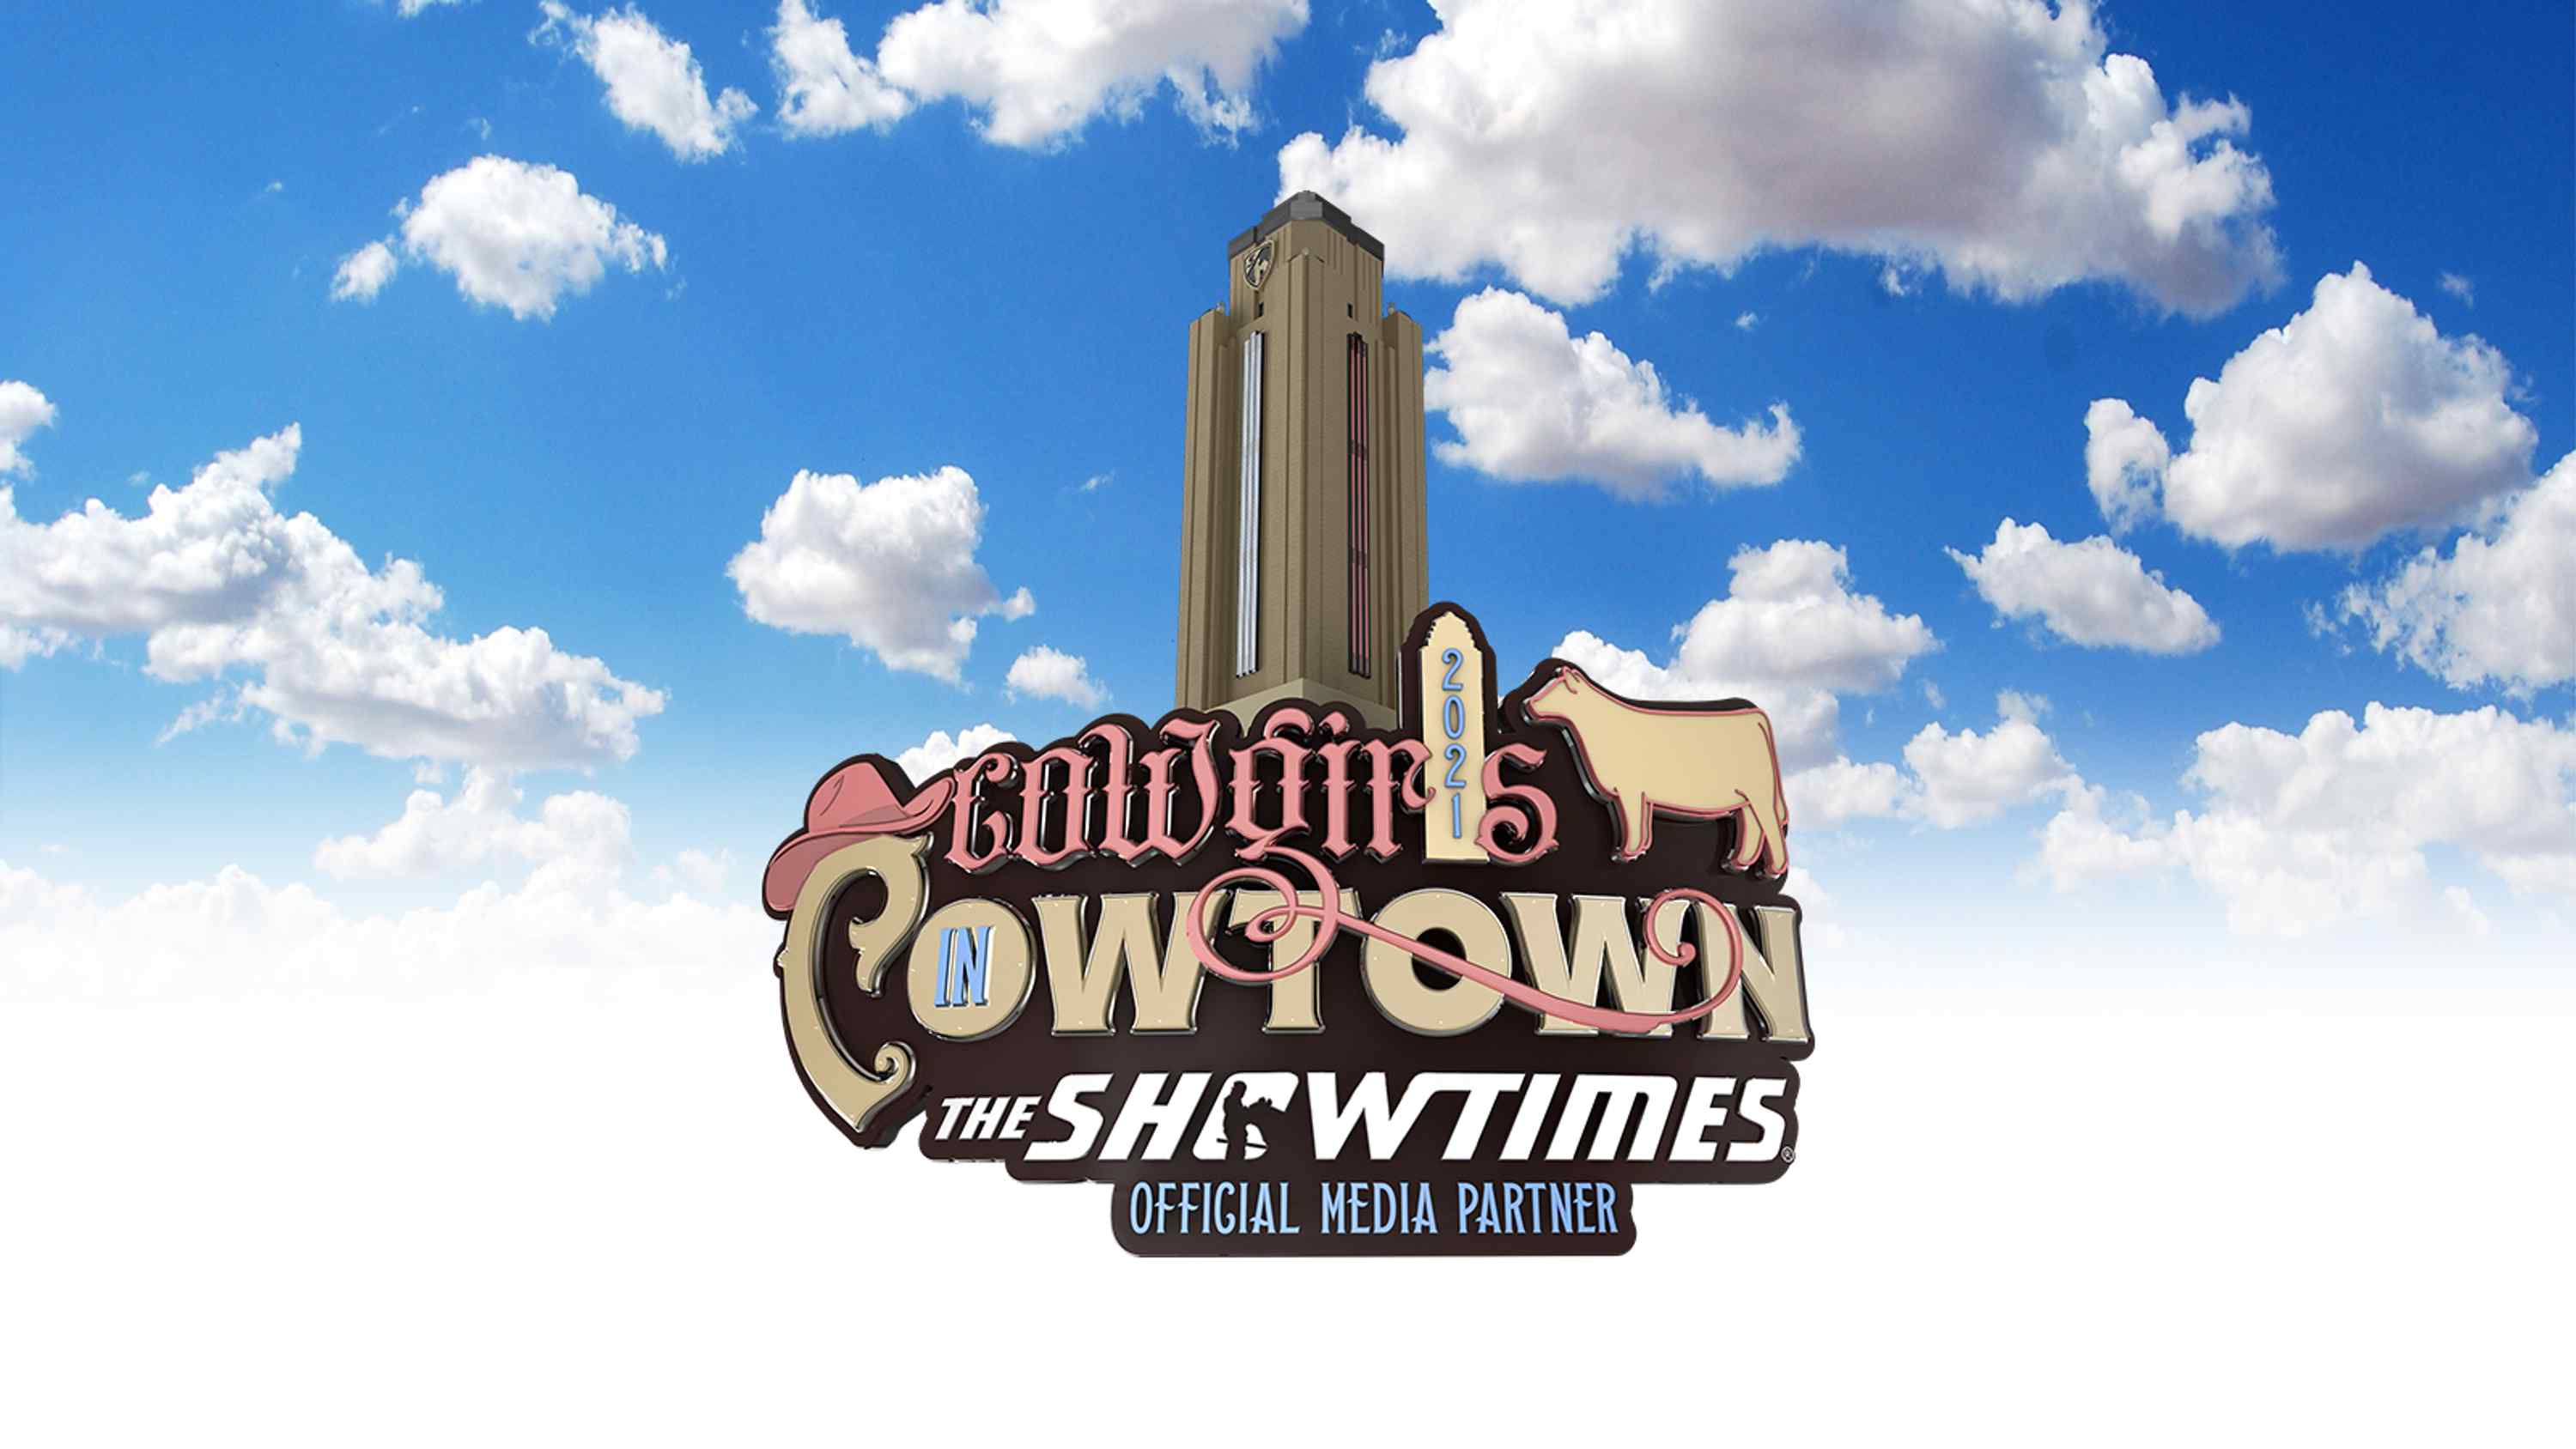 Cowgirls in Cowtown Media Partner